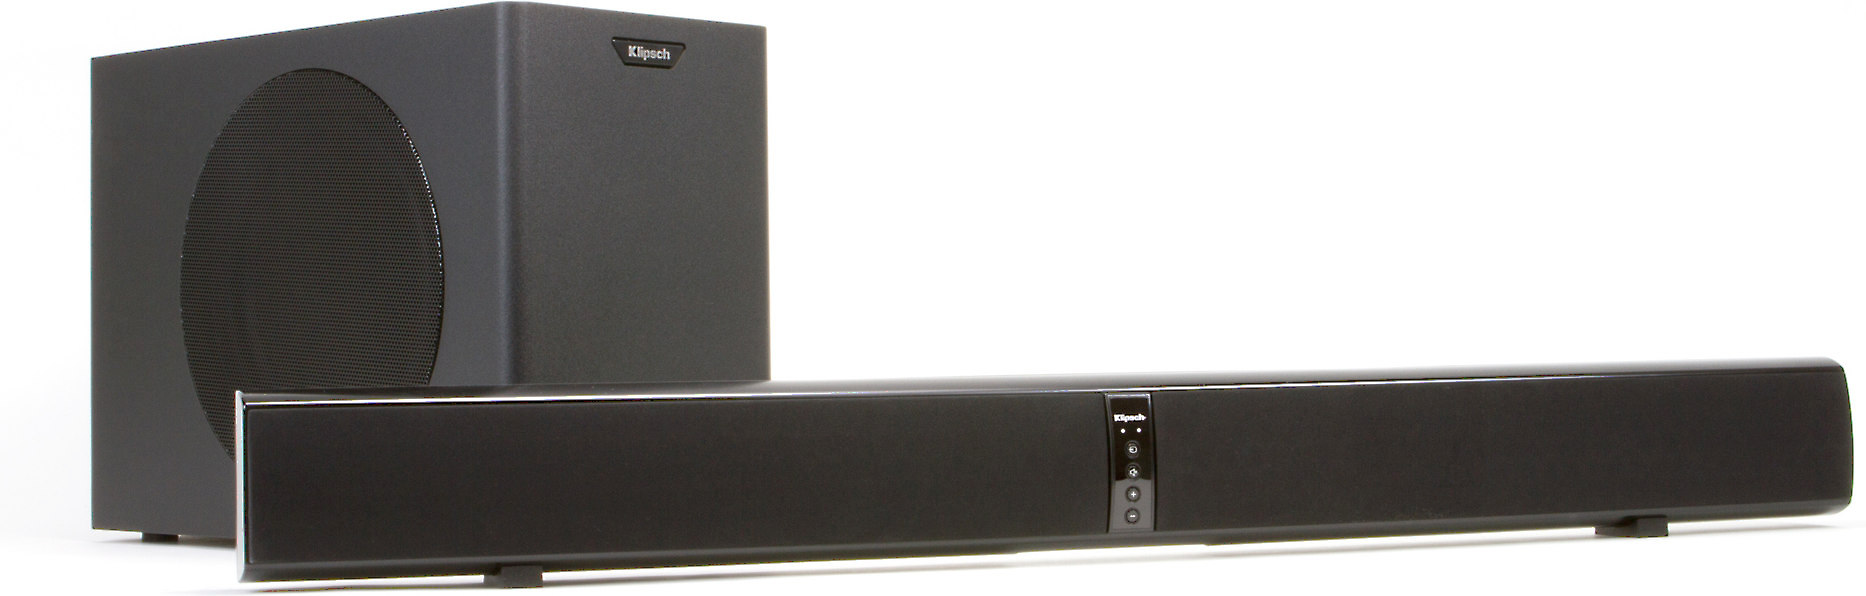 Klipsch Icon Sb 1 Powered Home Theater Sound Bar With Wireless Subwoofer At Crutchfield